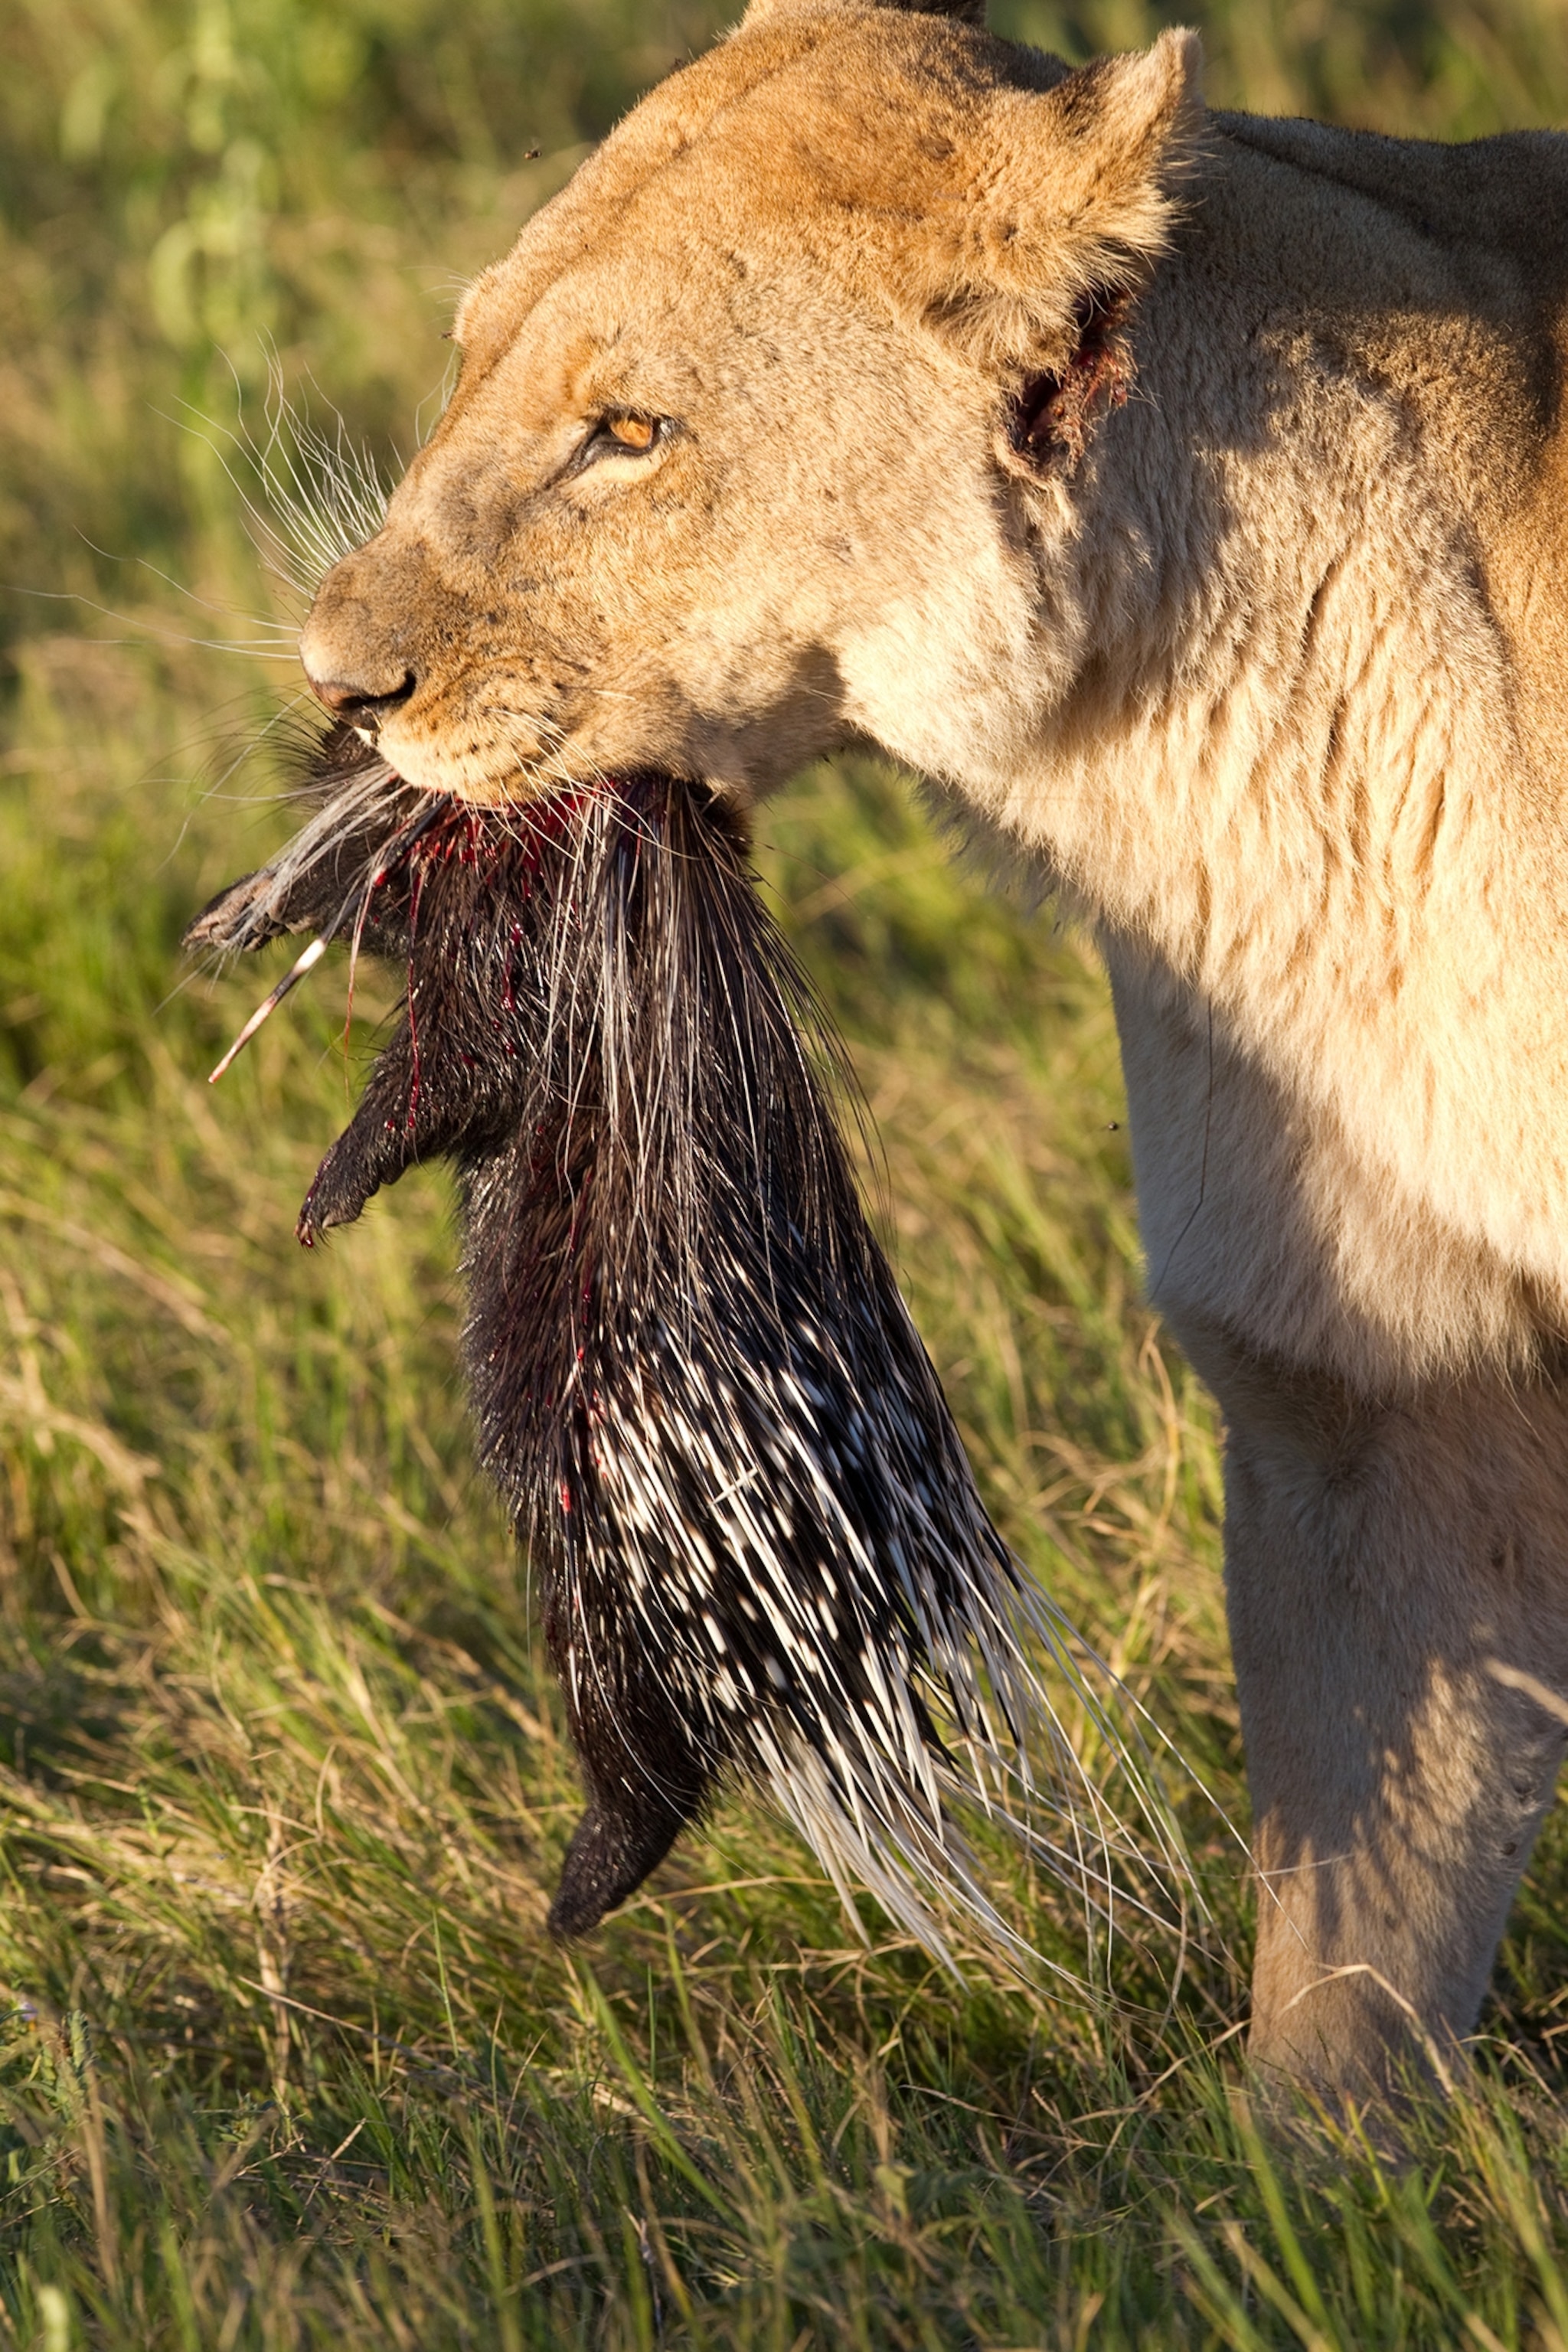 03-lions-attack-porcupines-nationalgeographic_1494512.jpg